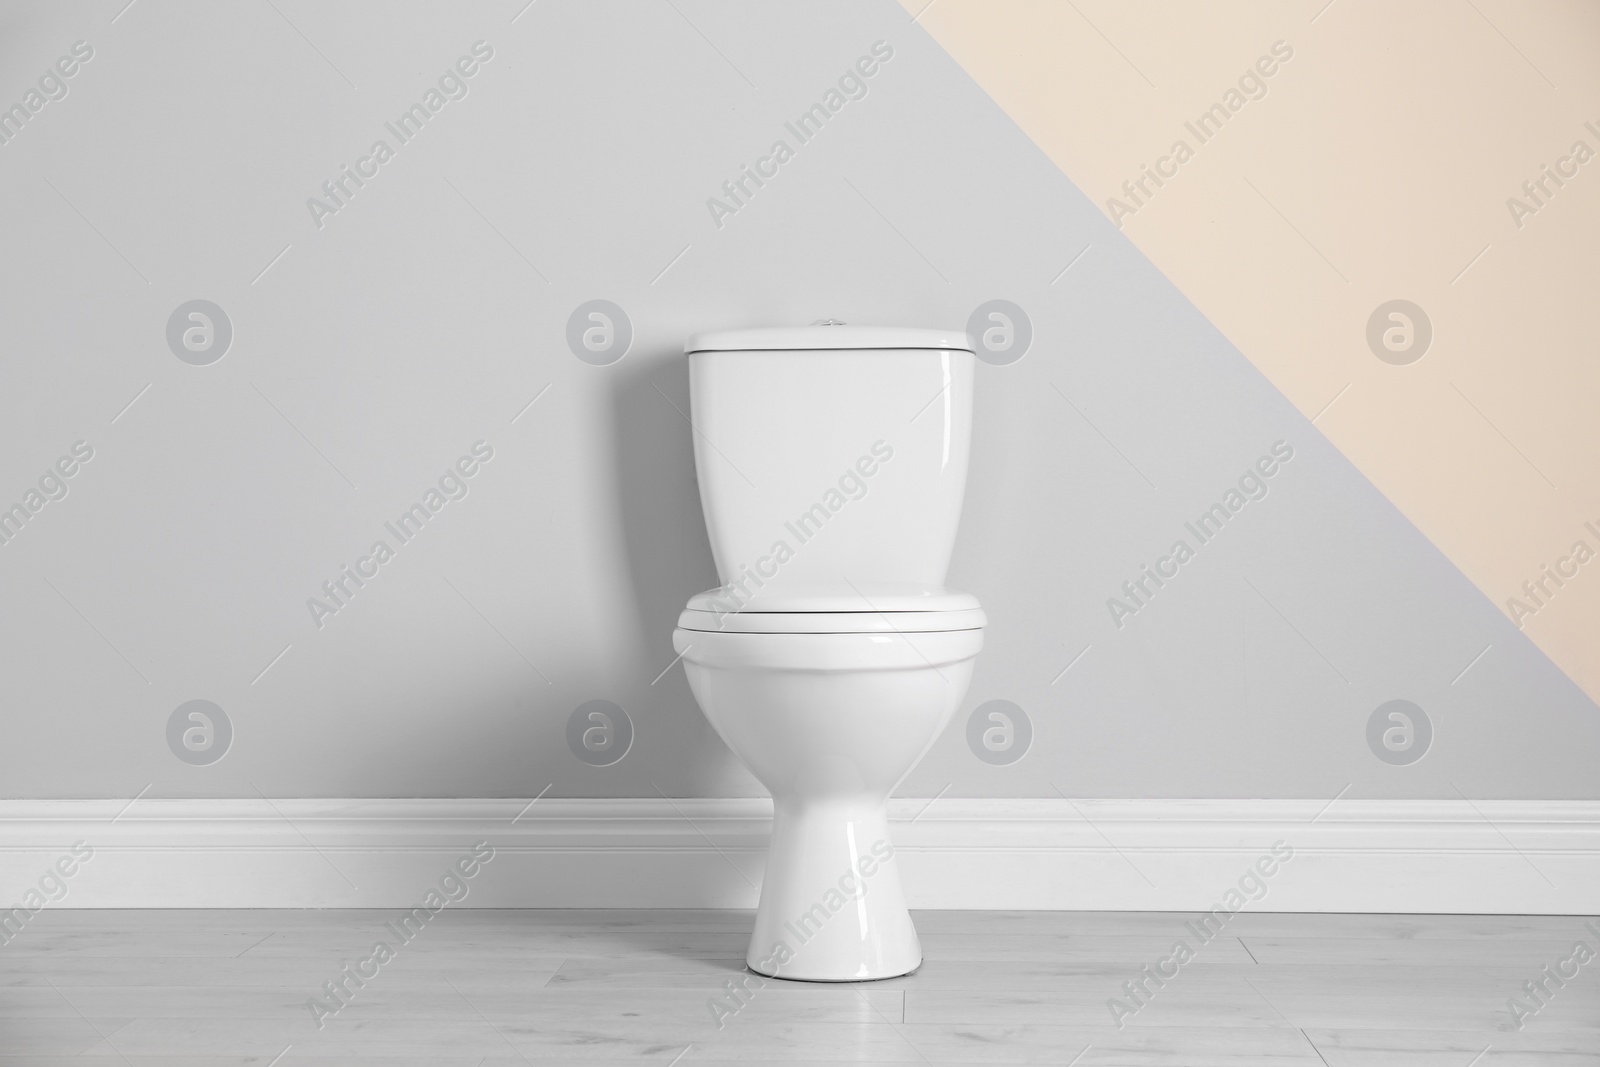 Photo of New toilet bowl near color wall indoors